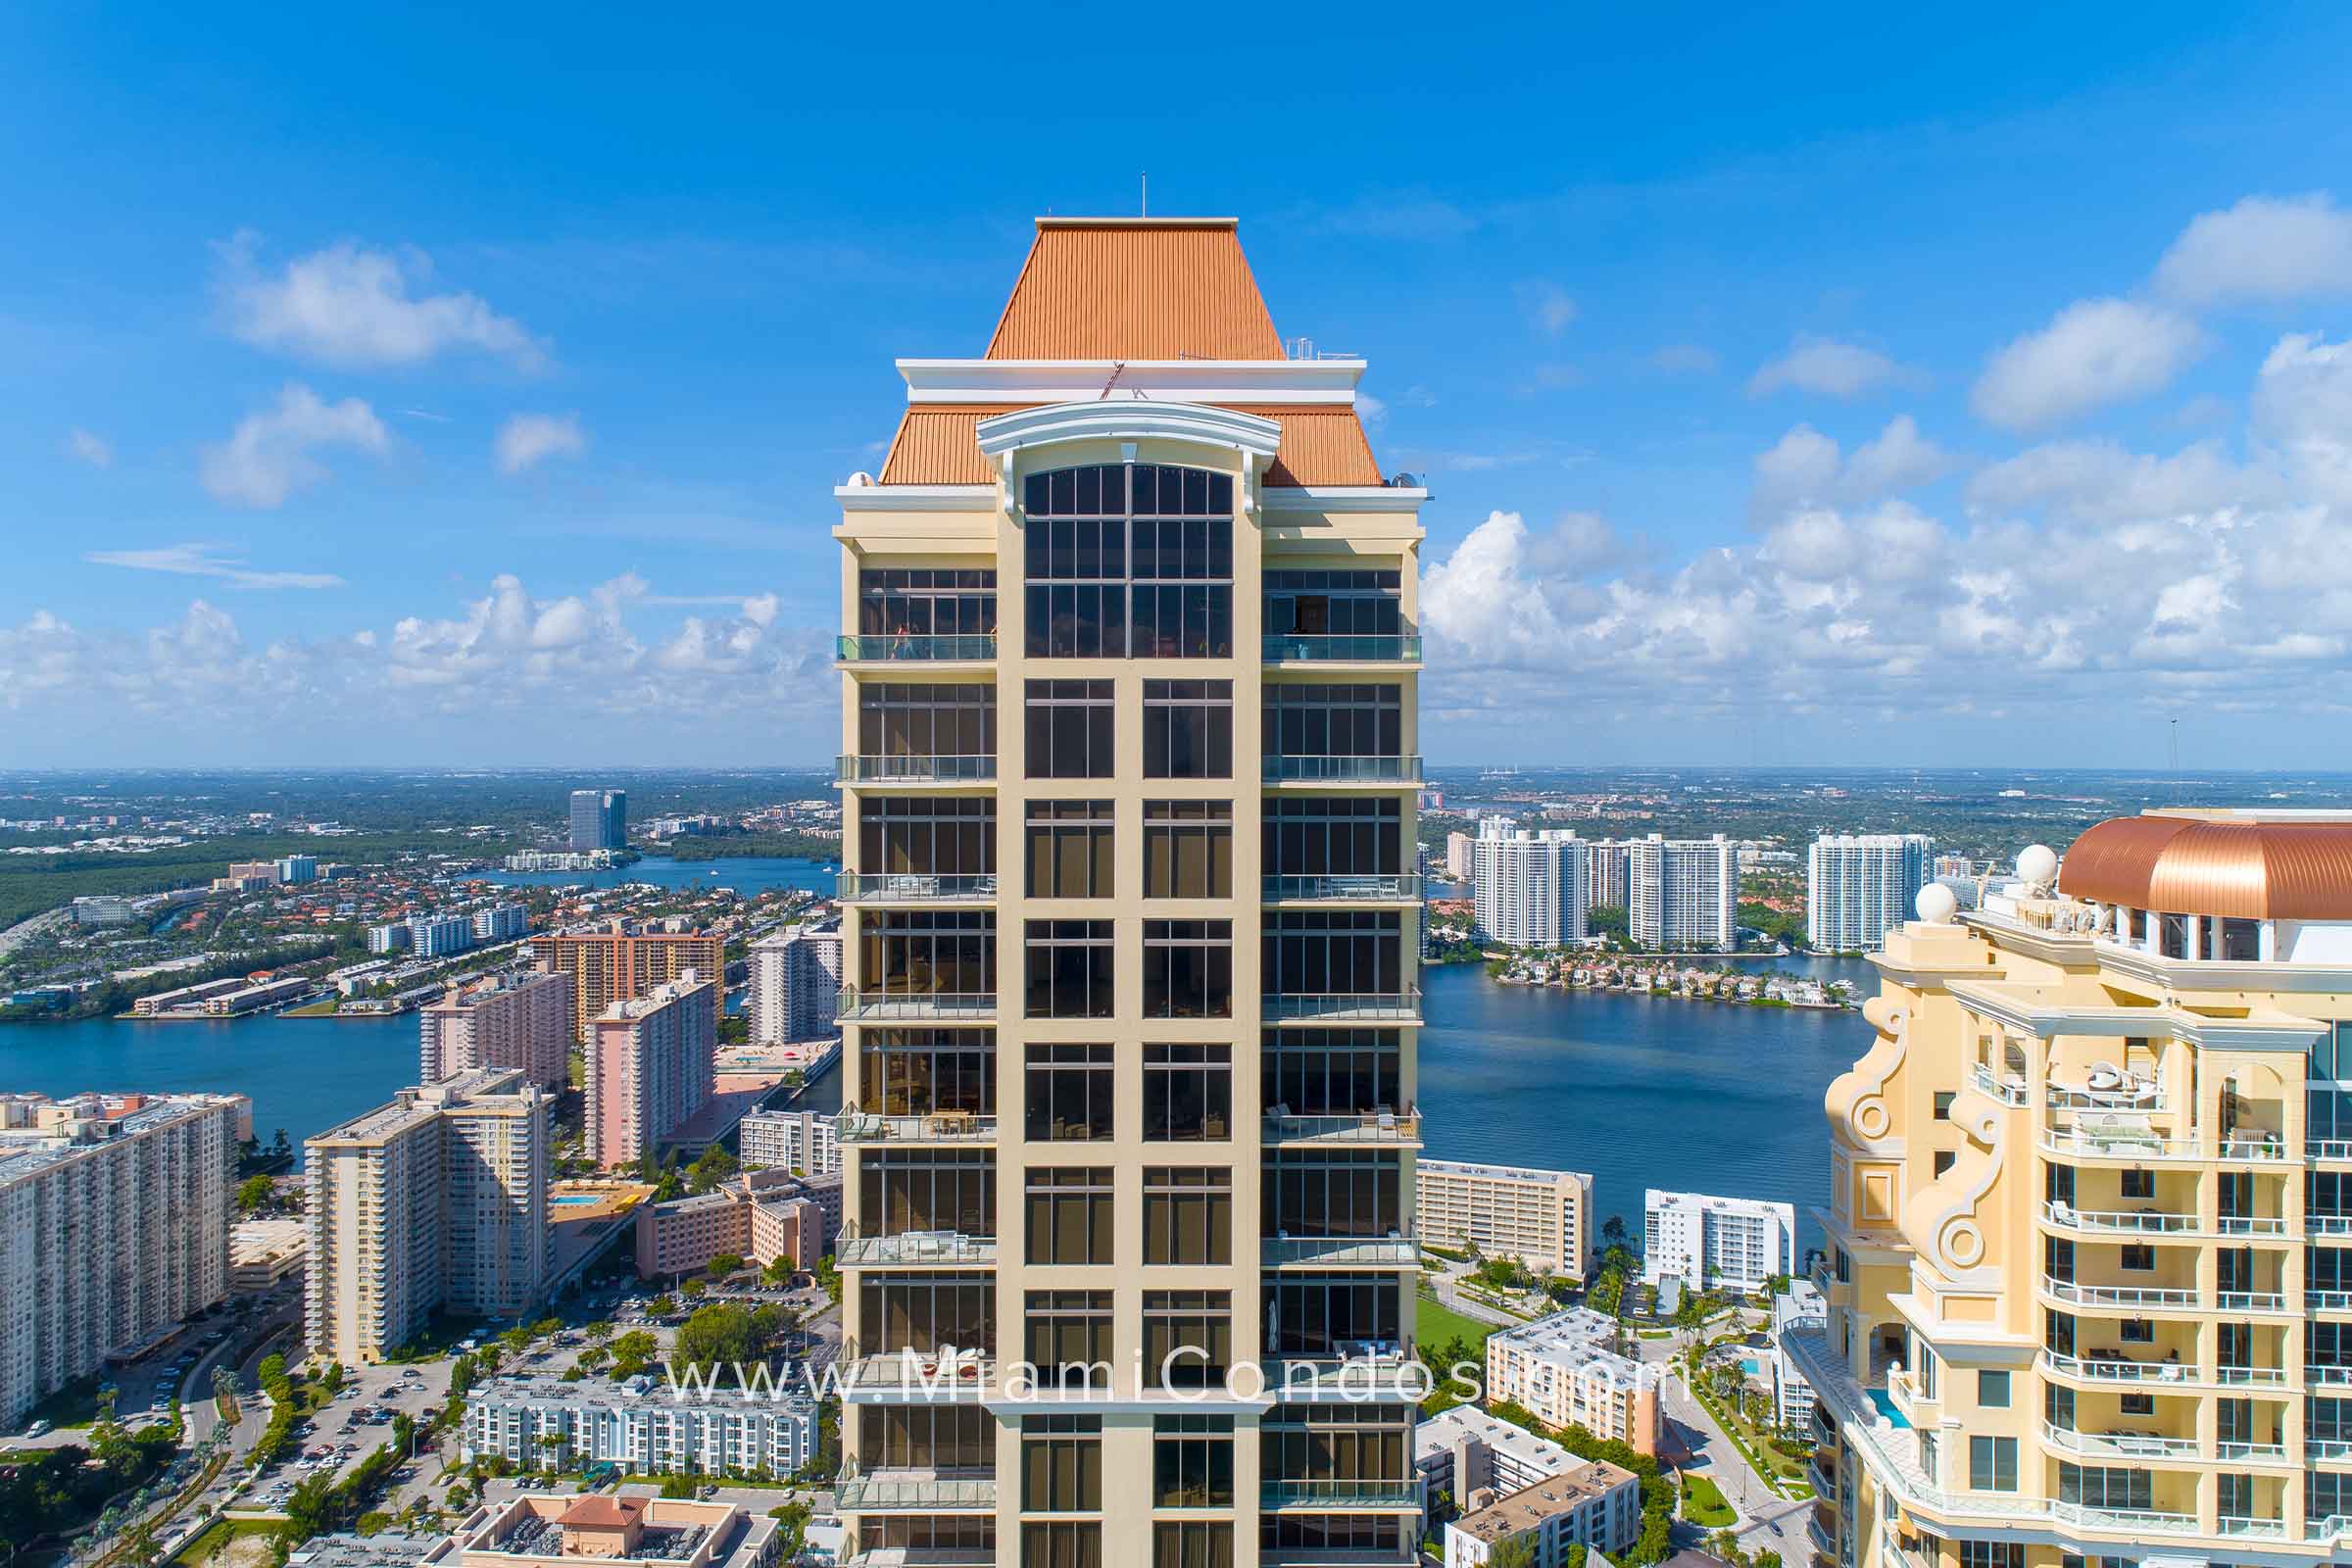 The Mansions at Acqualina in Sunny Isles Beach